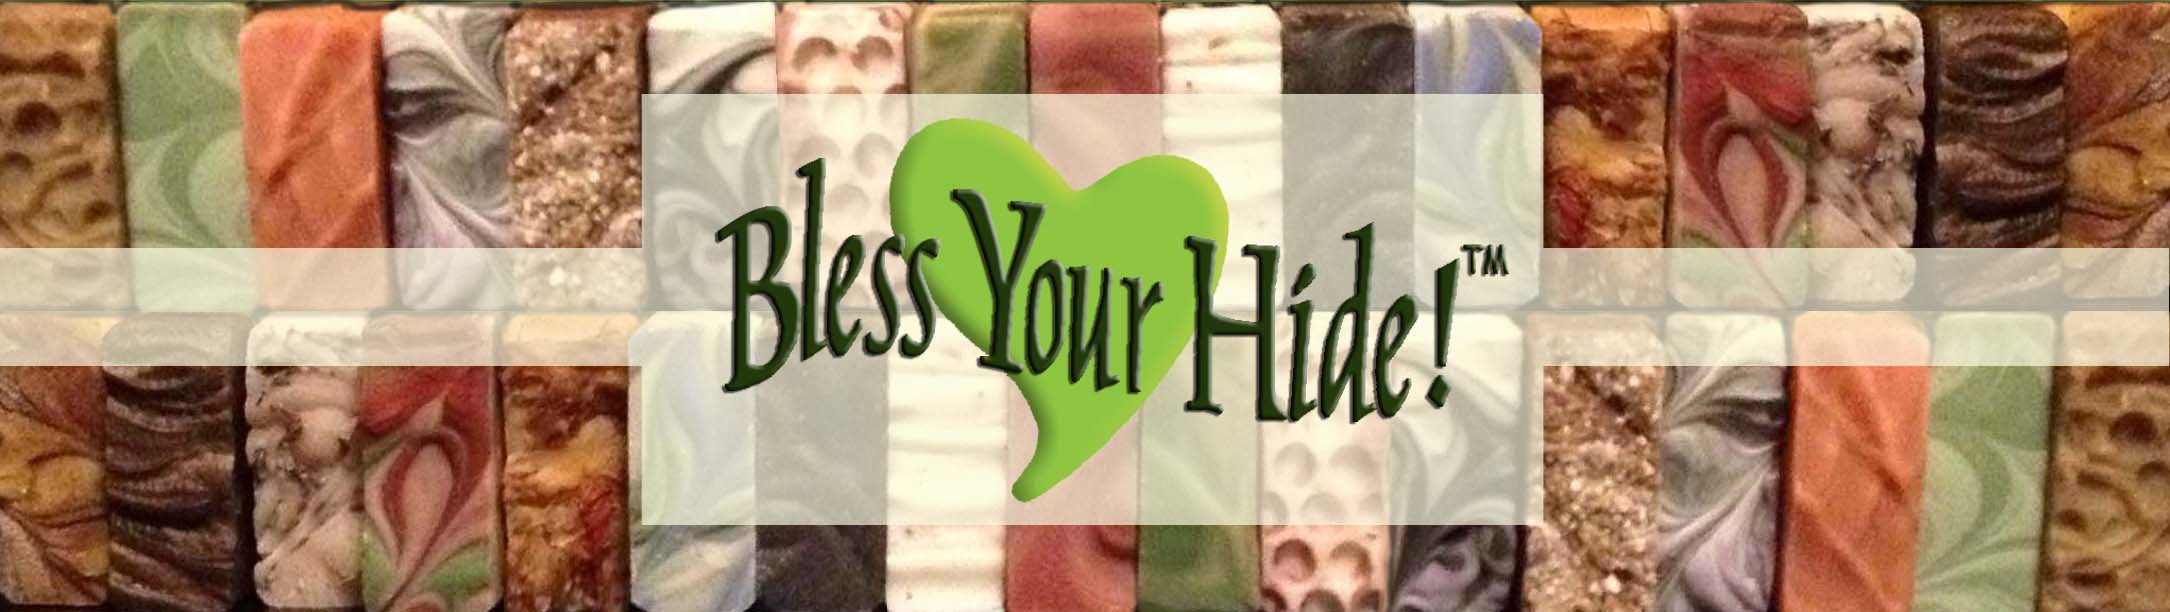 Bless Your Hide!